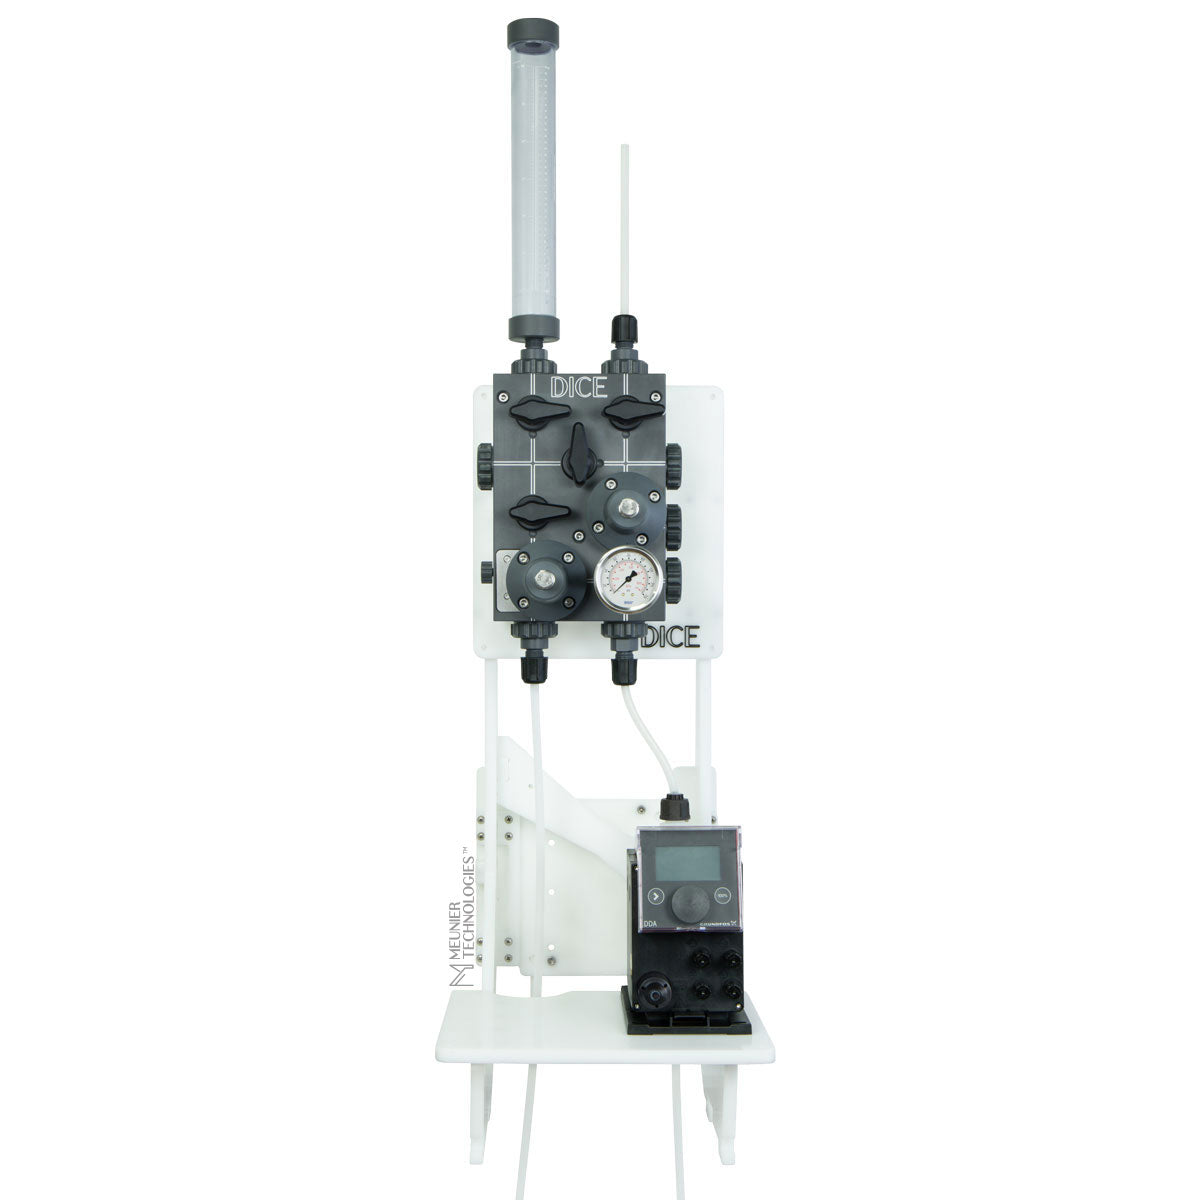 DICE™ System DM 1/2" - Self Supported & Wall Mount - Simplex